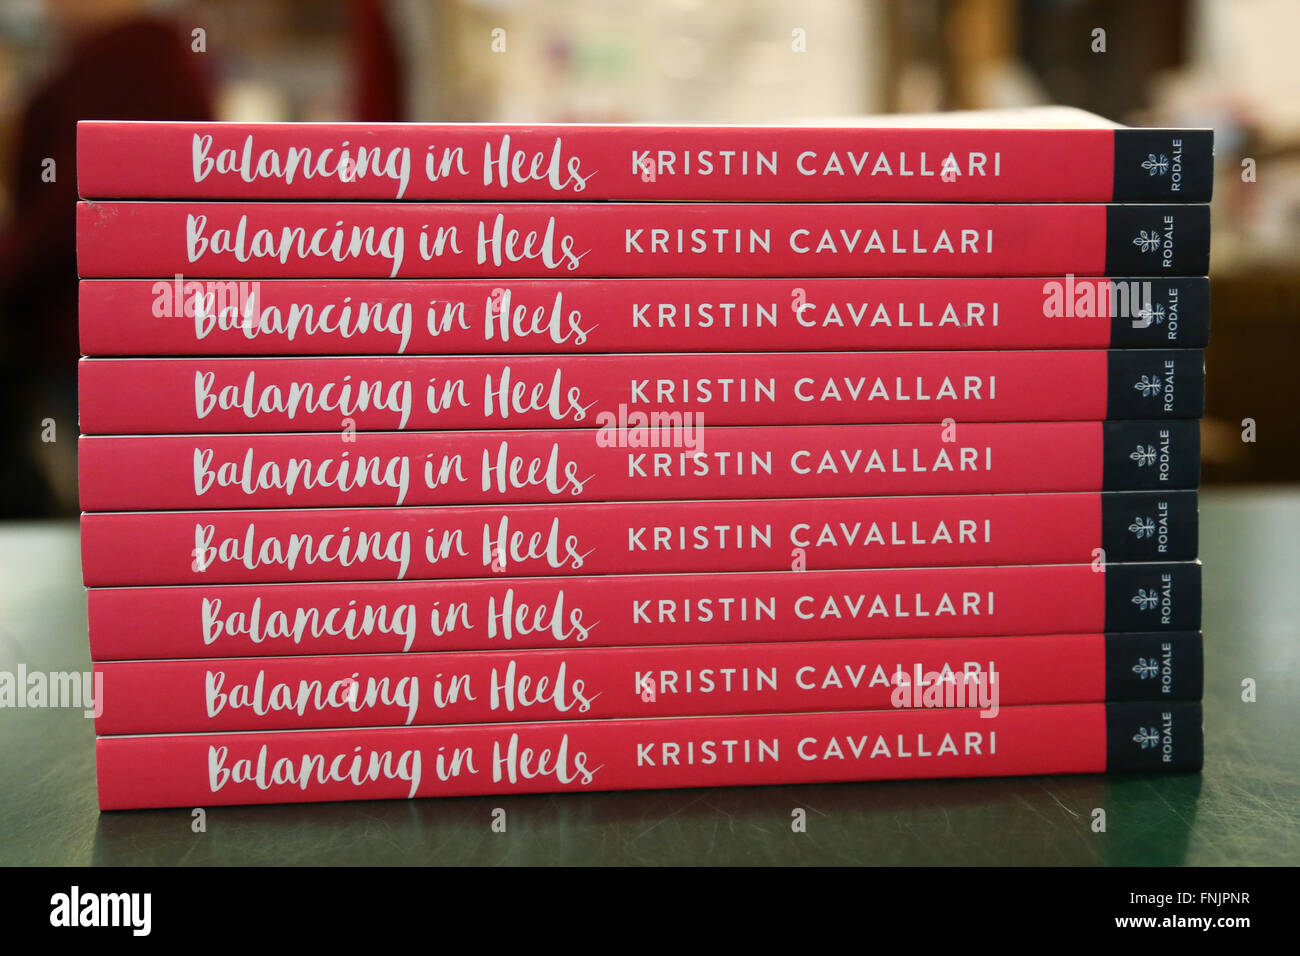 Huntington, New York, USA. 15th March, 2016. Kristin Cavallari signs copies of her book 'Balancing in Heels: My Journey to Health, Happiness, and Making it all Work' at Book Revue on March 15, 2016 in Huntington, New York. Credit:  Debby Wong/Alamy Live News Stock Photo